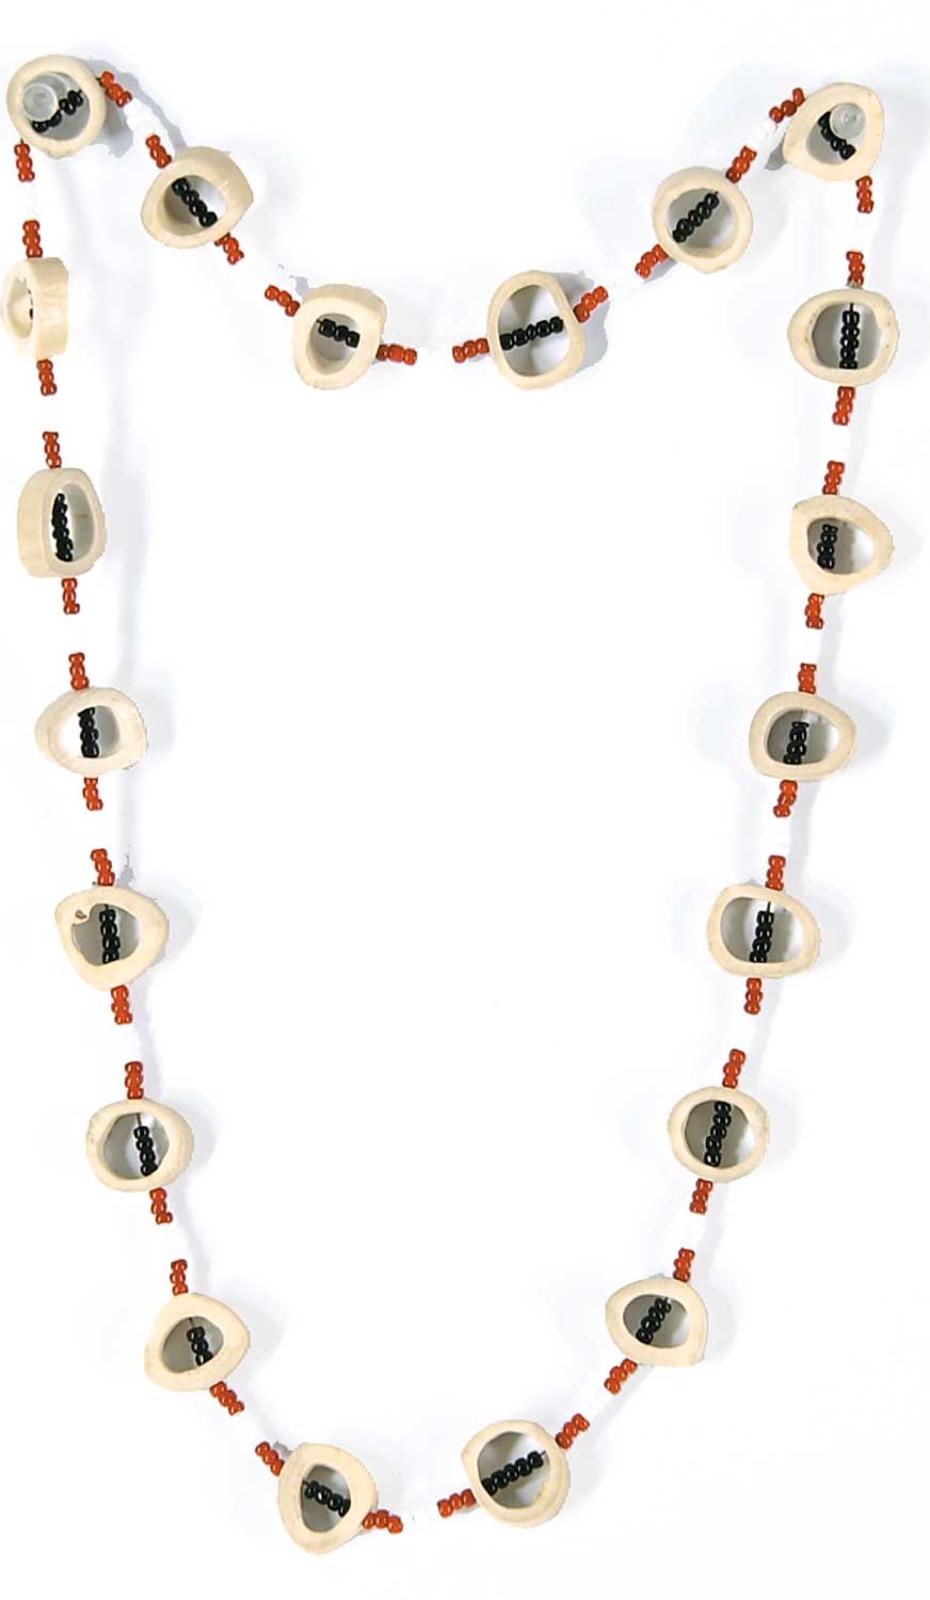 Robert Charles Aller (1922-2008) - Untitled - Moose Bone with Red, White and Black Beads Necklace